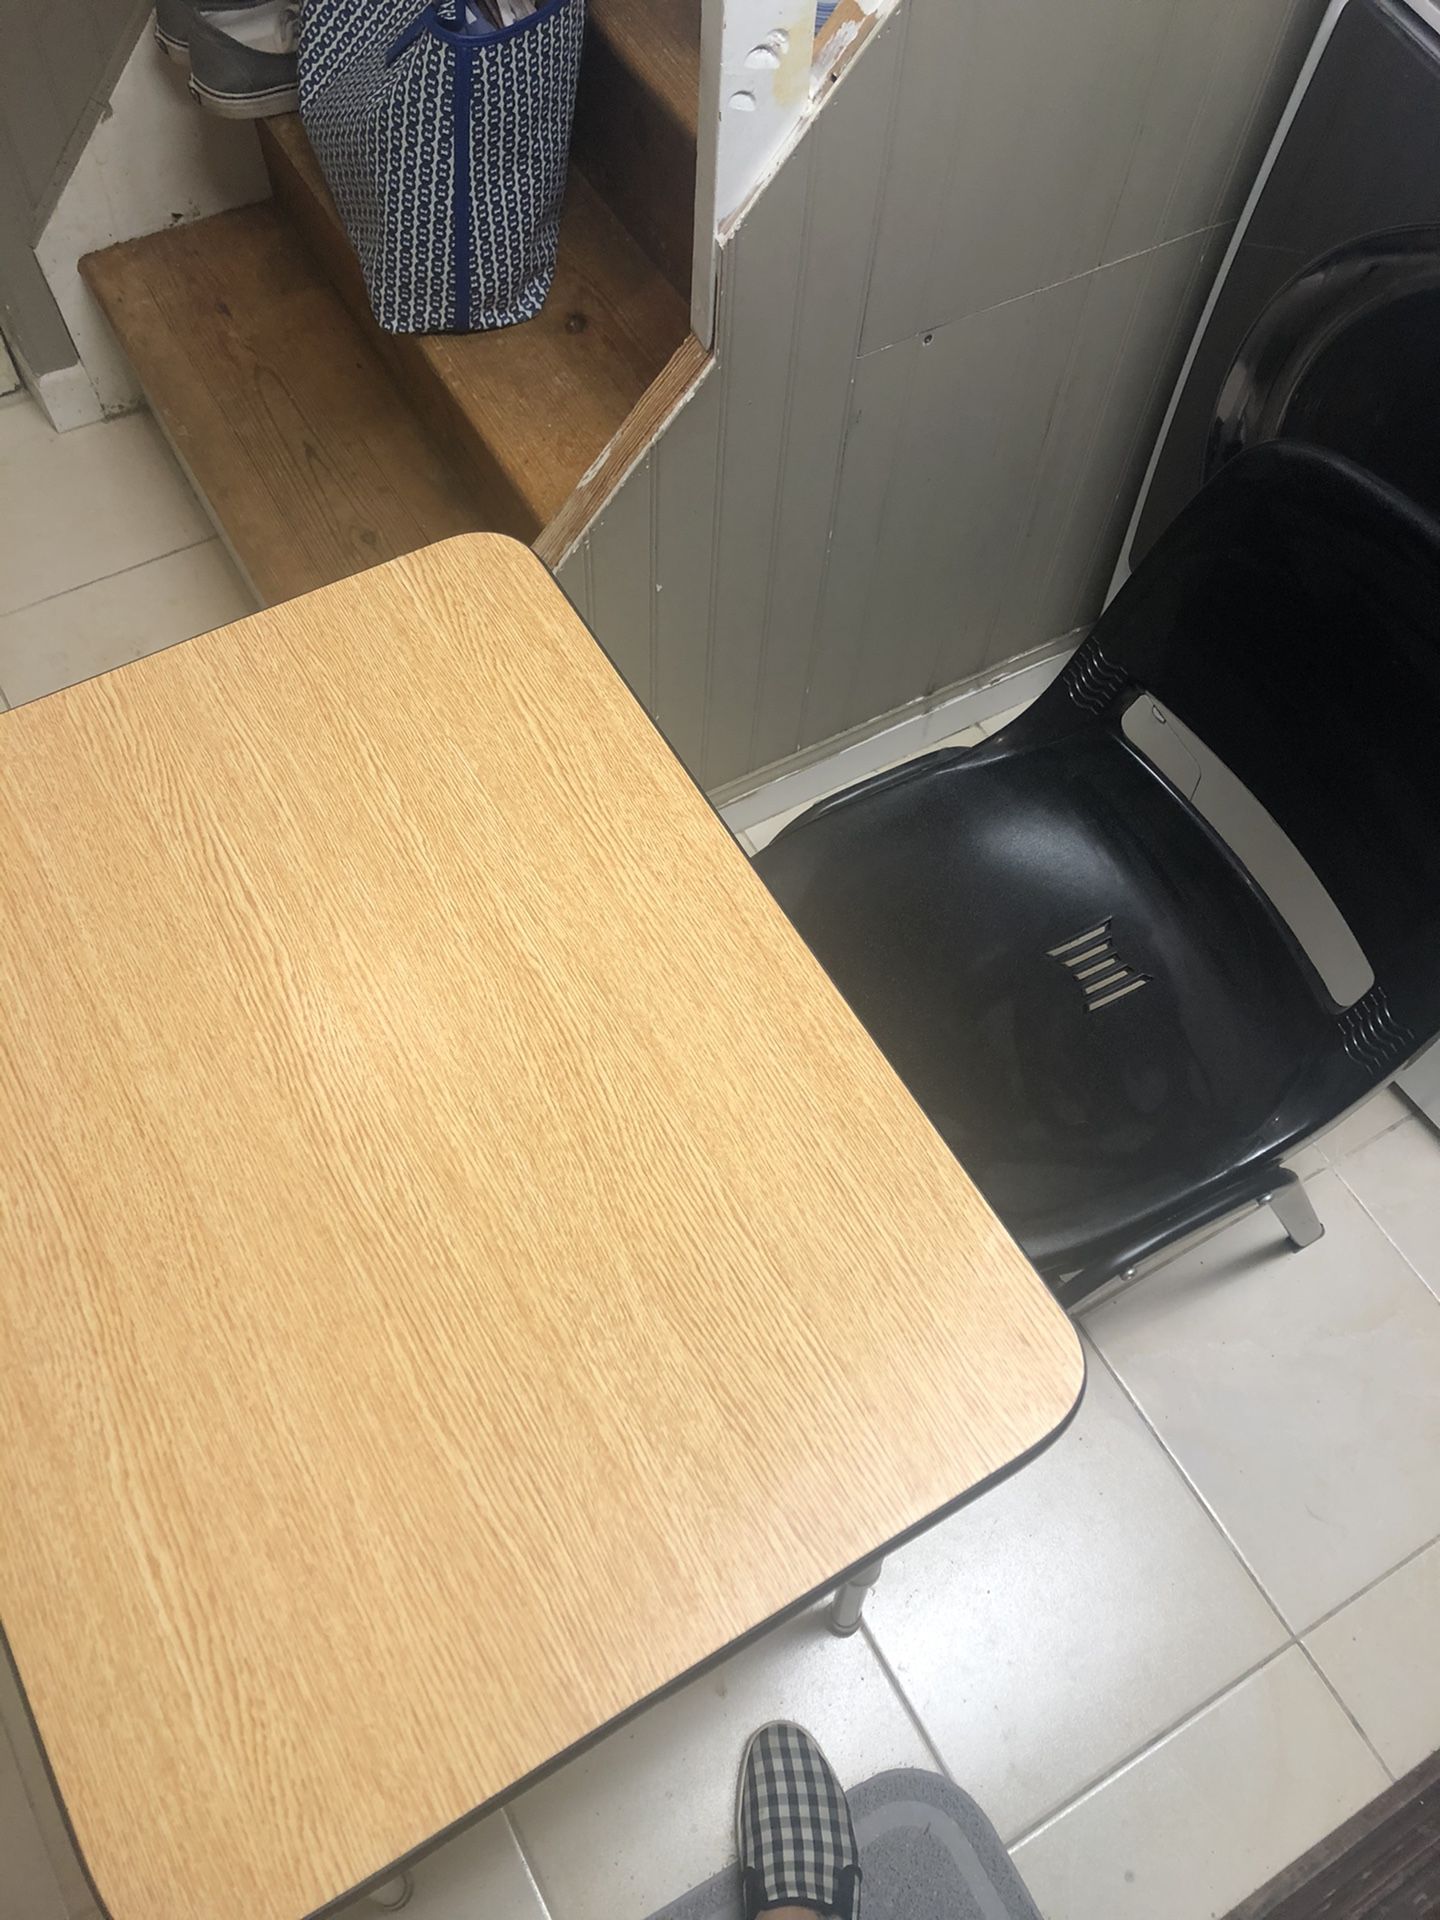 Children’s school desk and chair, like new